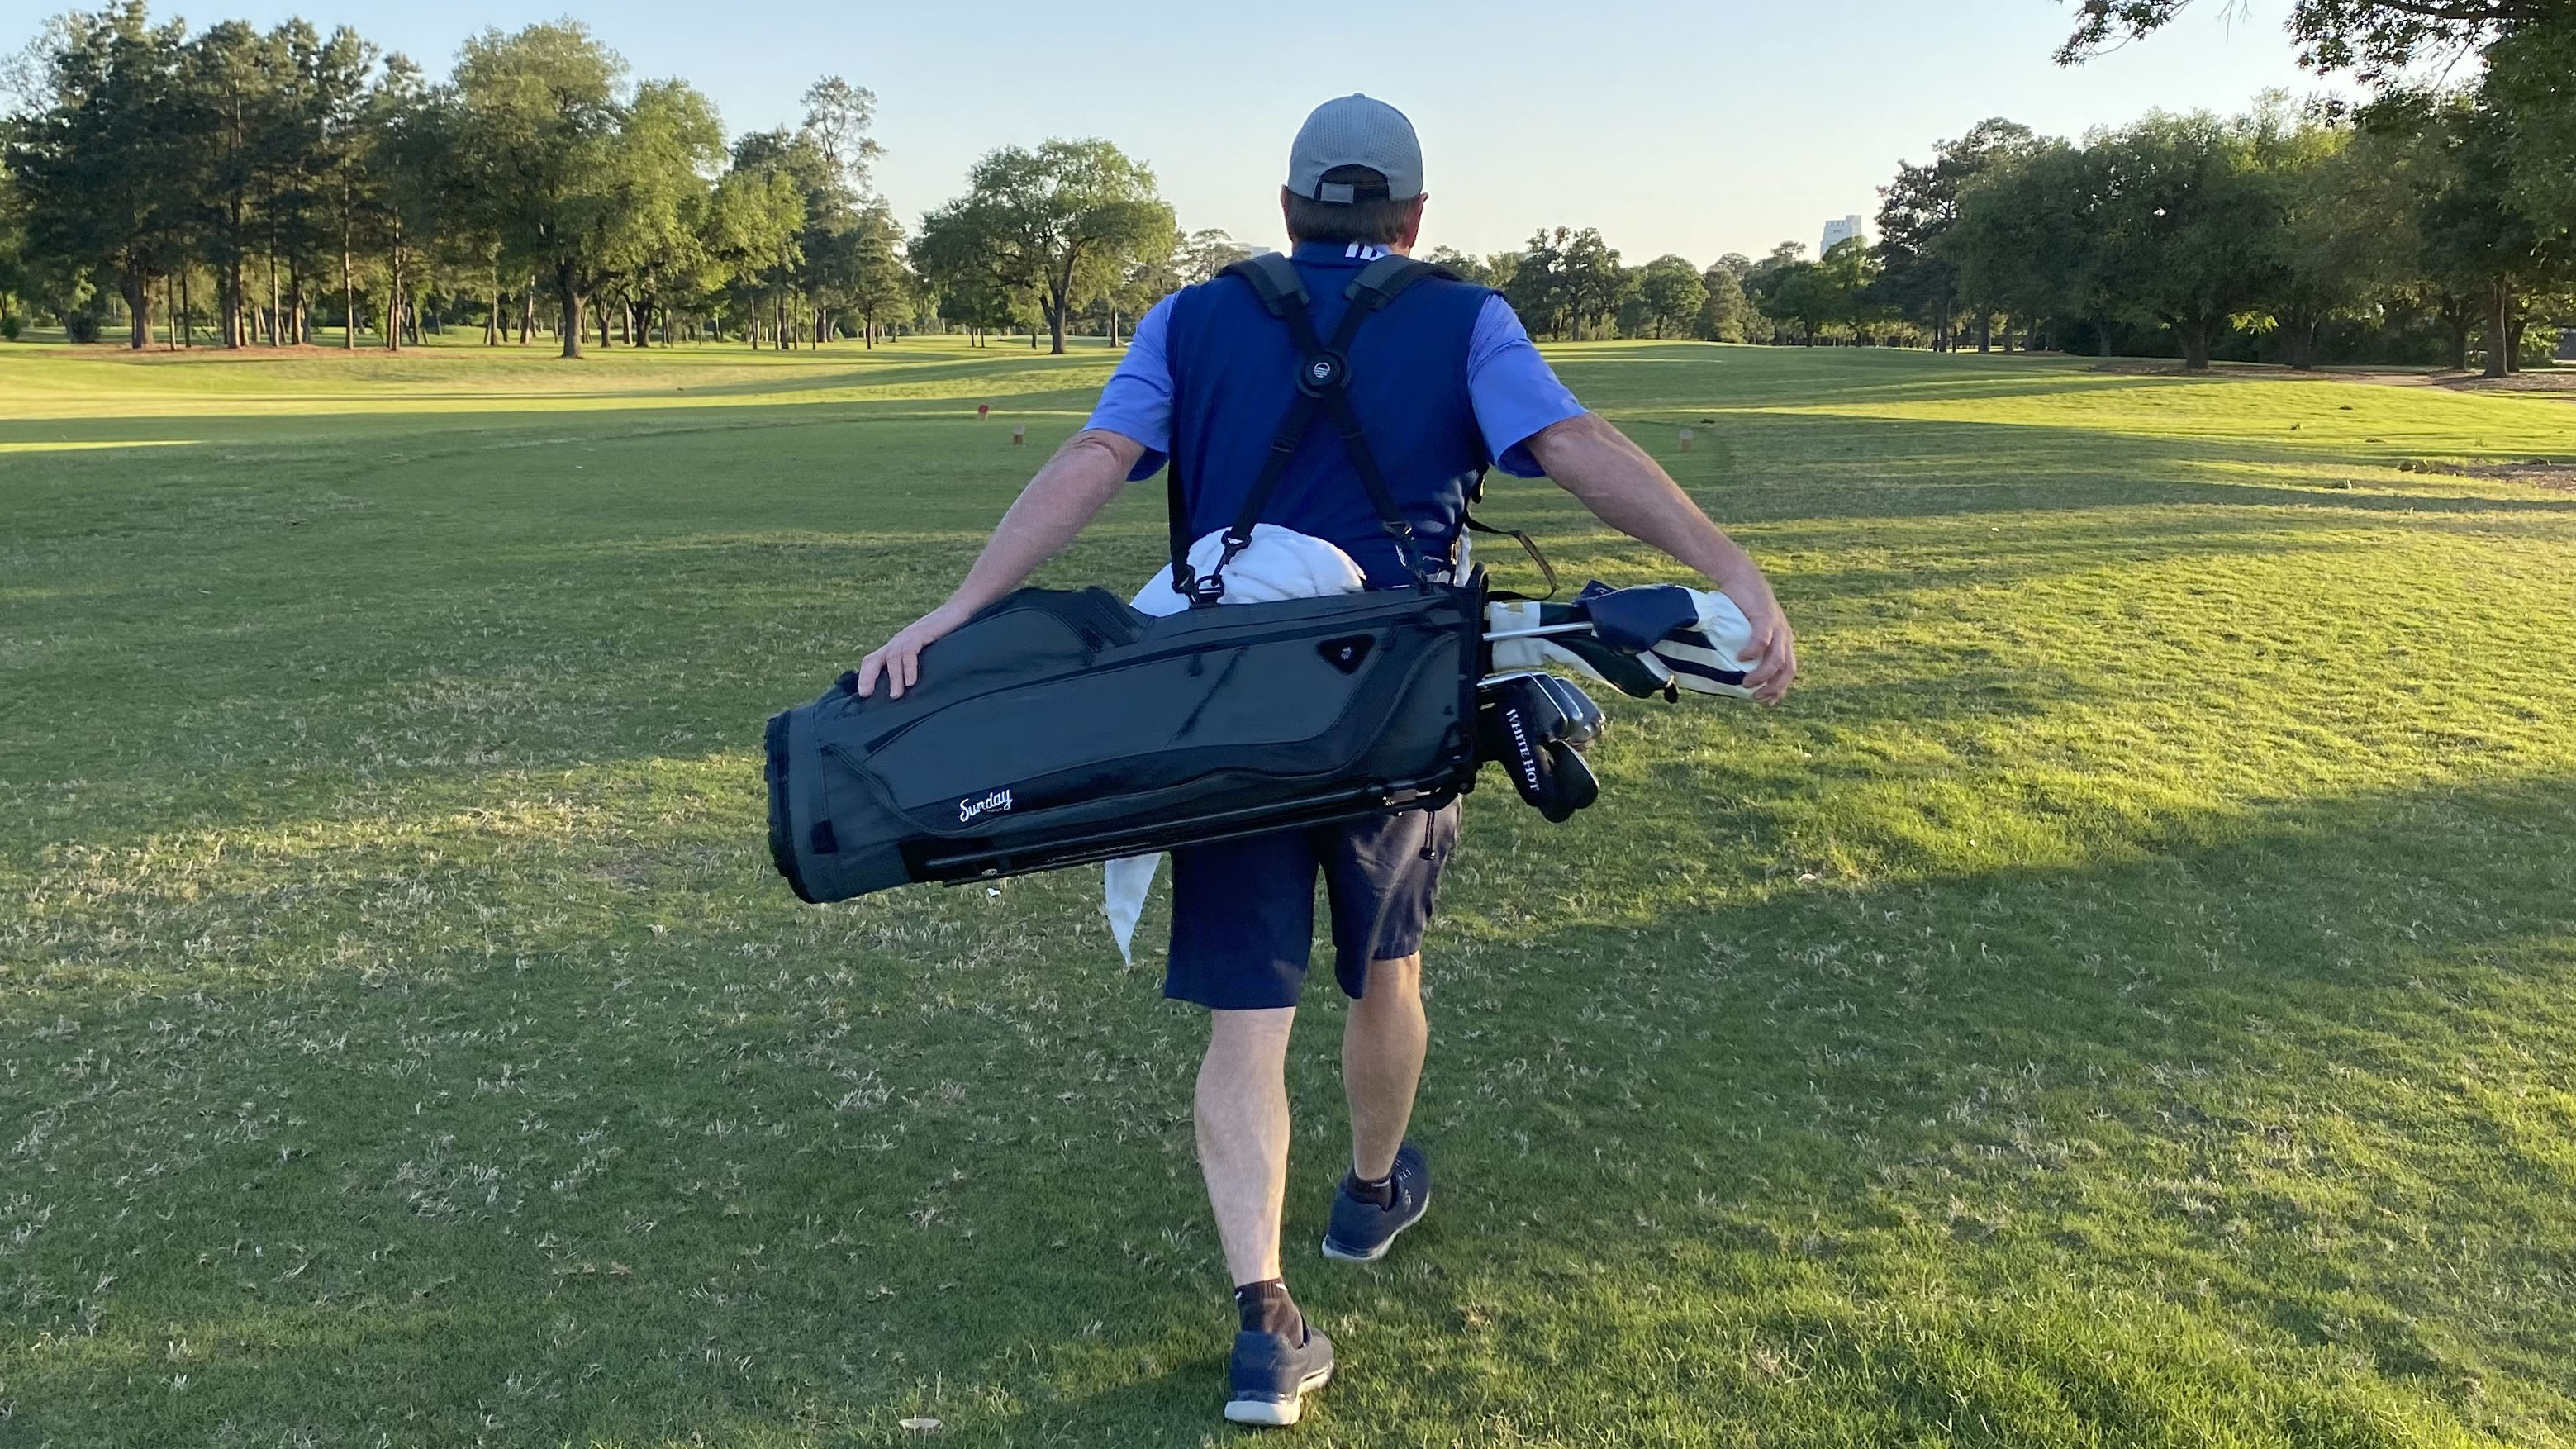 Sunday Golf Ryder 23 Stand Bag Review | Golf Monthly